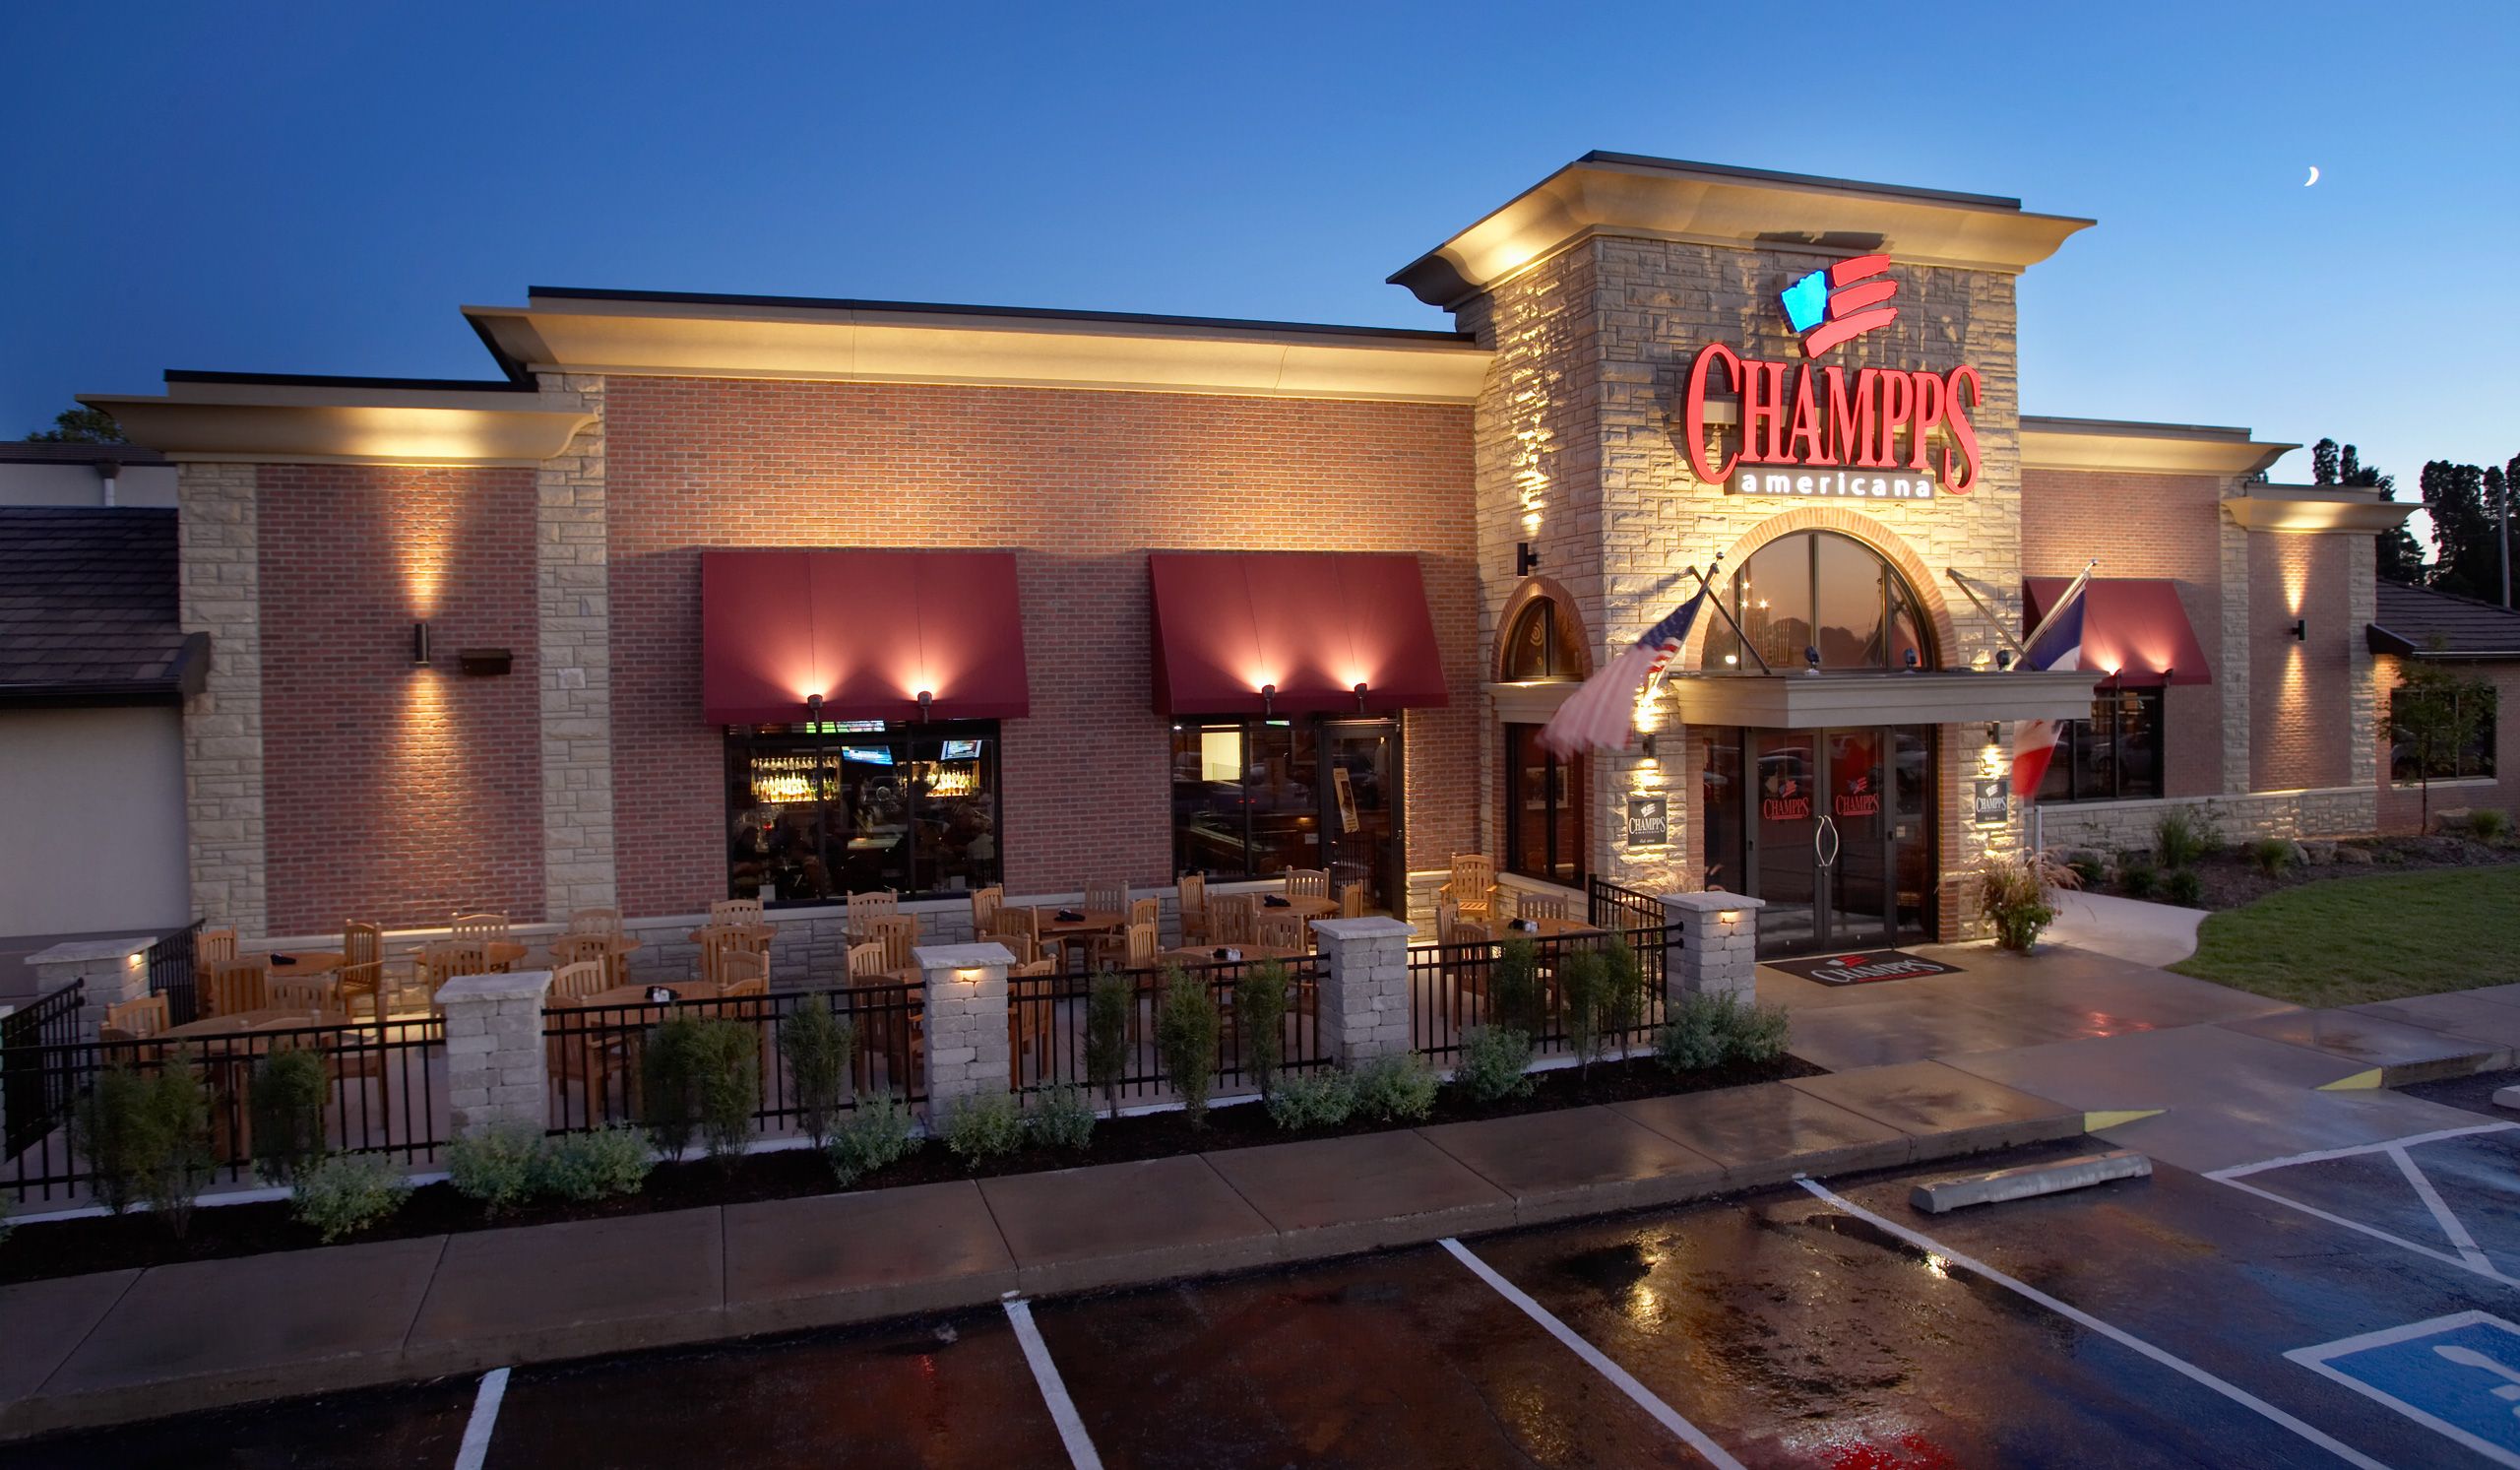 The front of Champps Americana Restaurant  at dusk